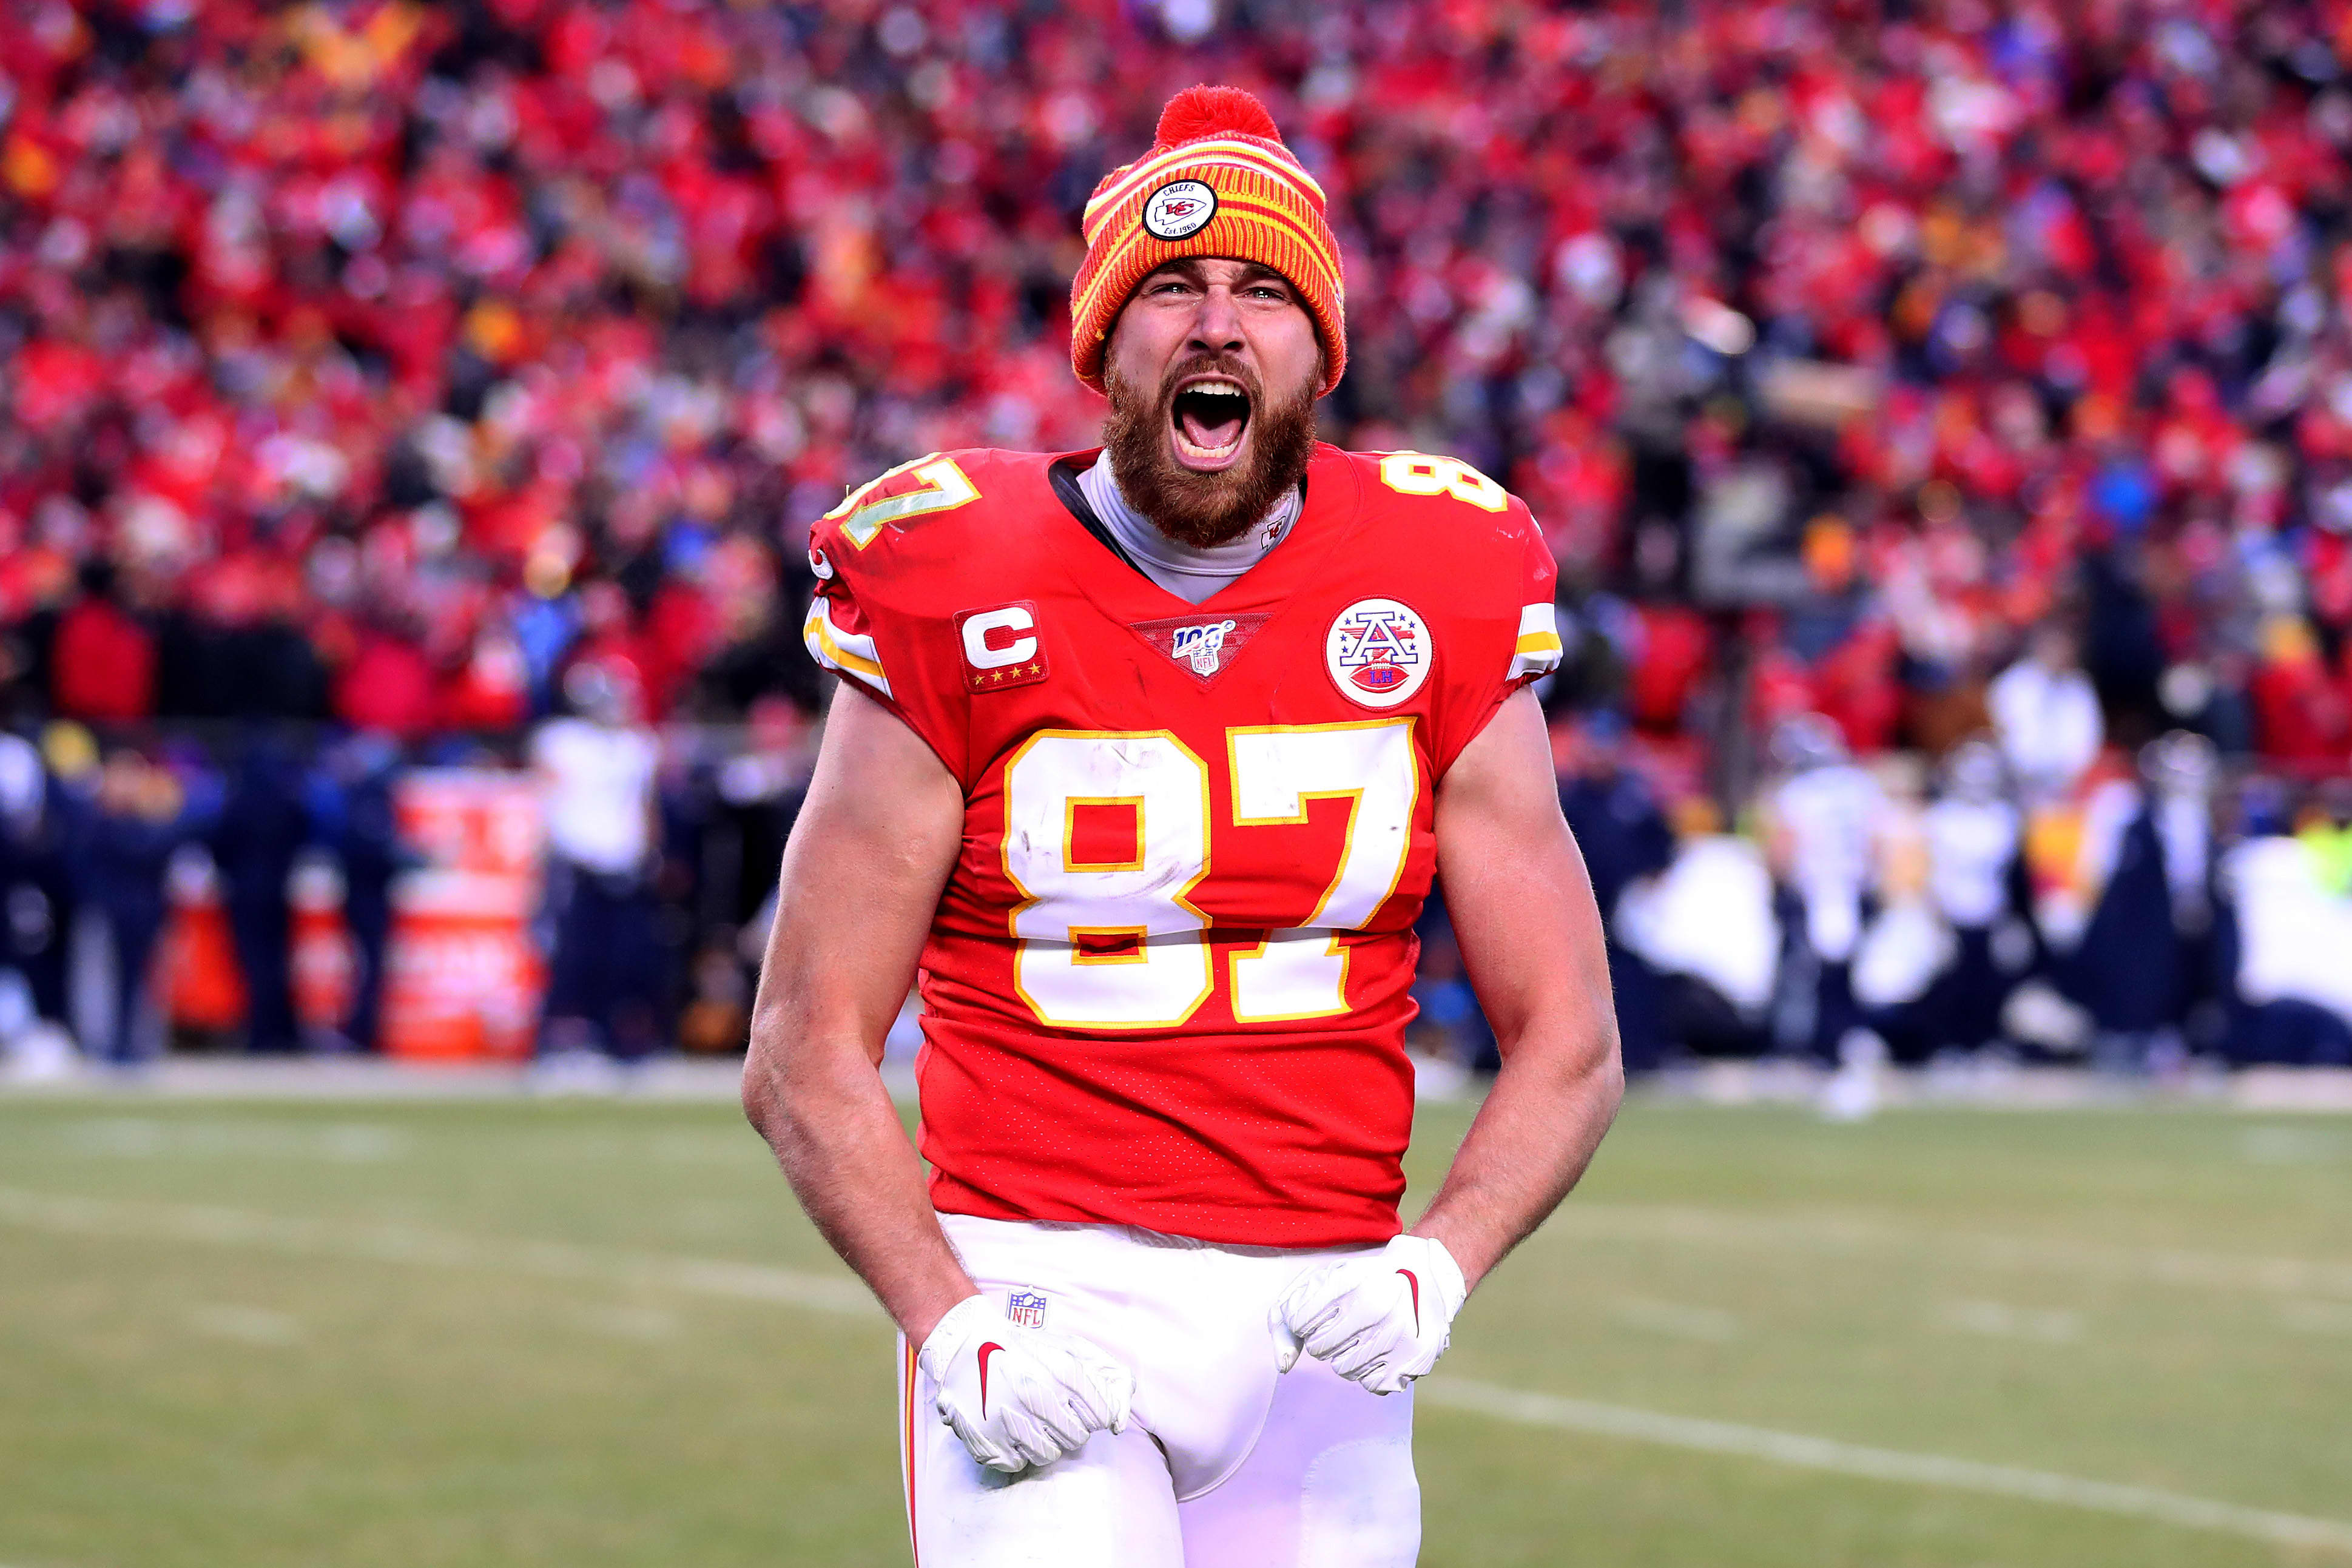 Travis Kelce signs a new two-year $34.25M deal with the Cheifs